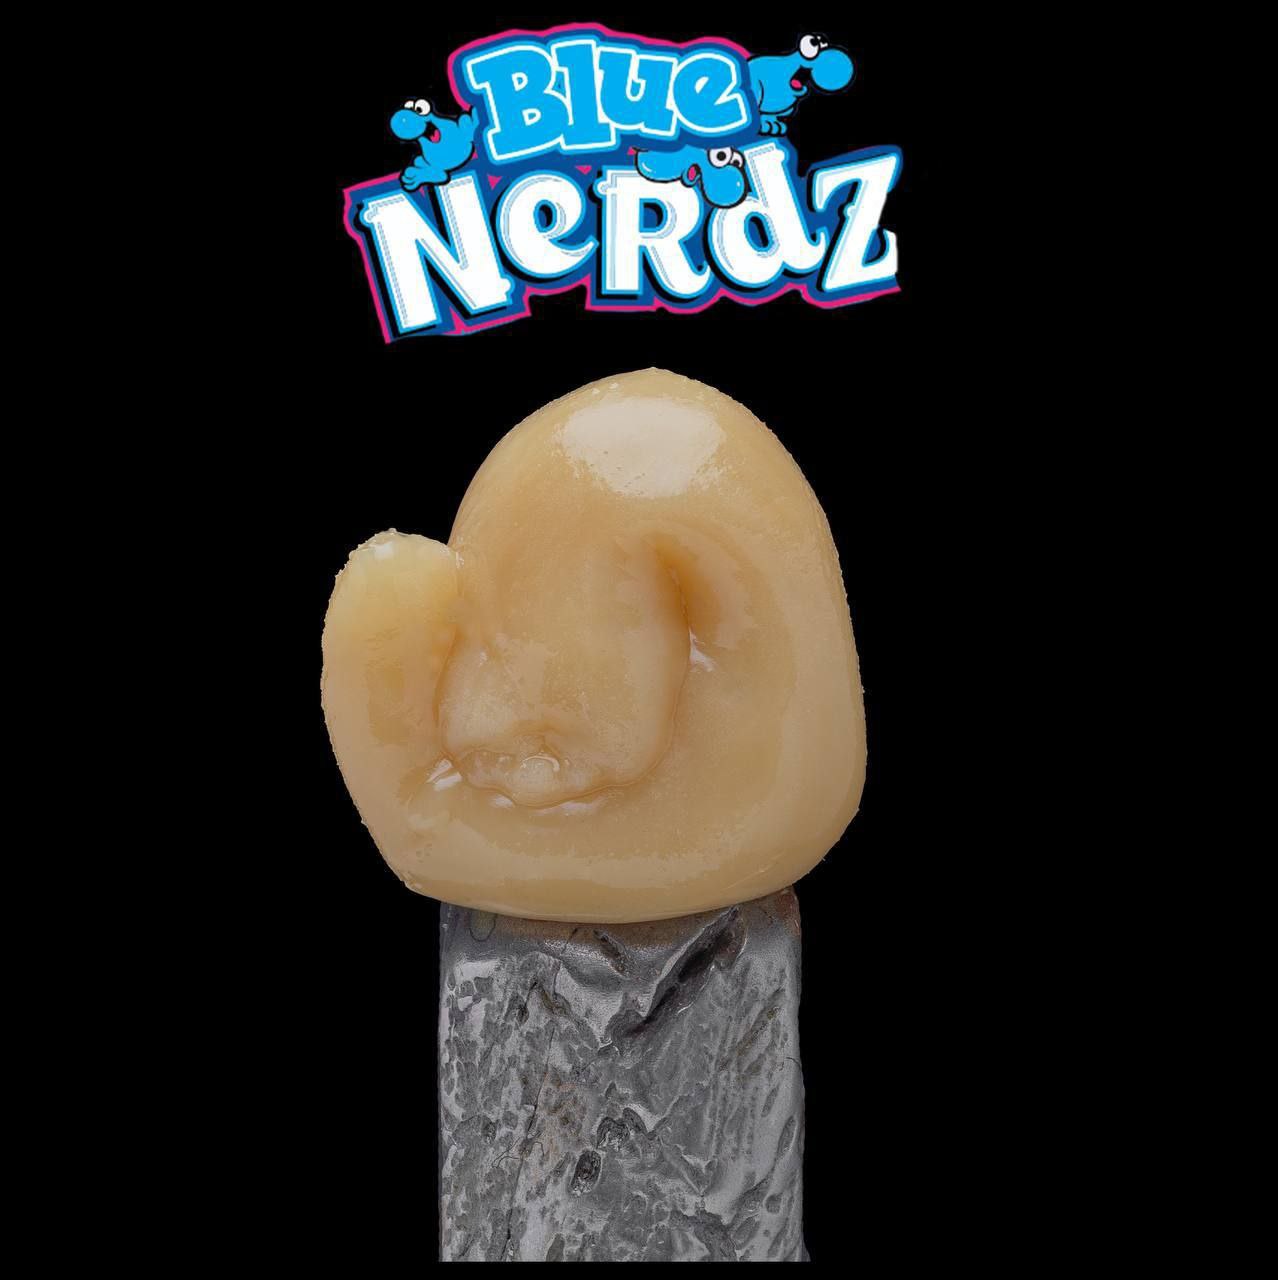 A close-up of a caramel-colored gummy candy shaped like an ear, held by a pair of metal tweezers. Above the candy, there is a logo reading "Import placeholder for 18" in blue and white text against a black background.